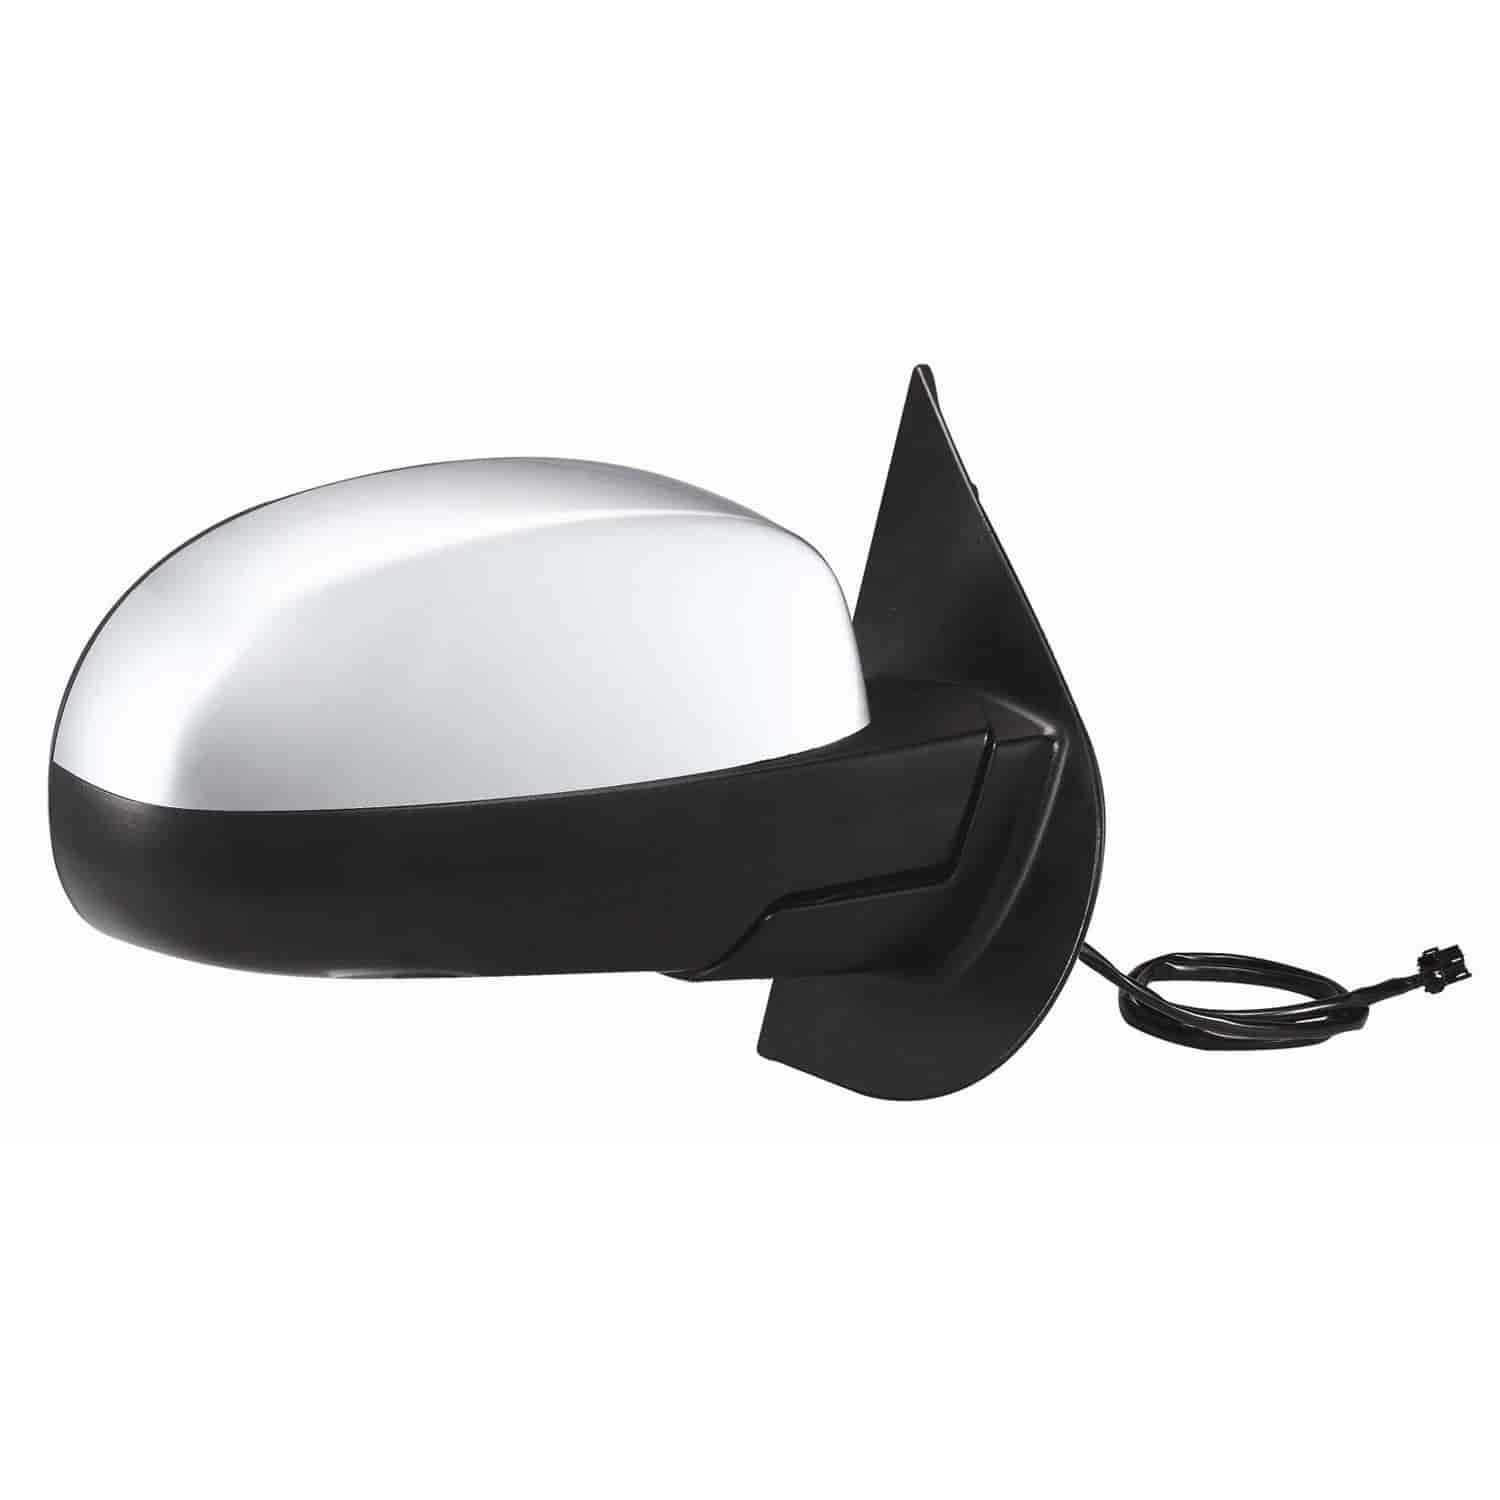 OEM Style Replacement mirror for Repl OEM Style